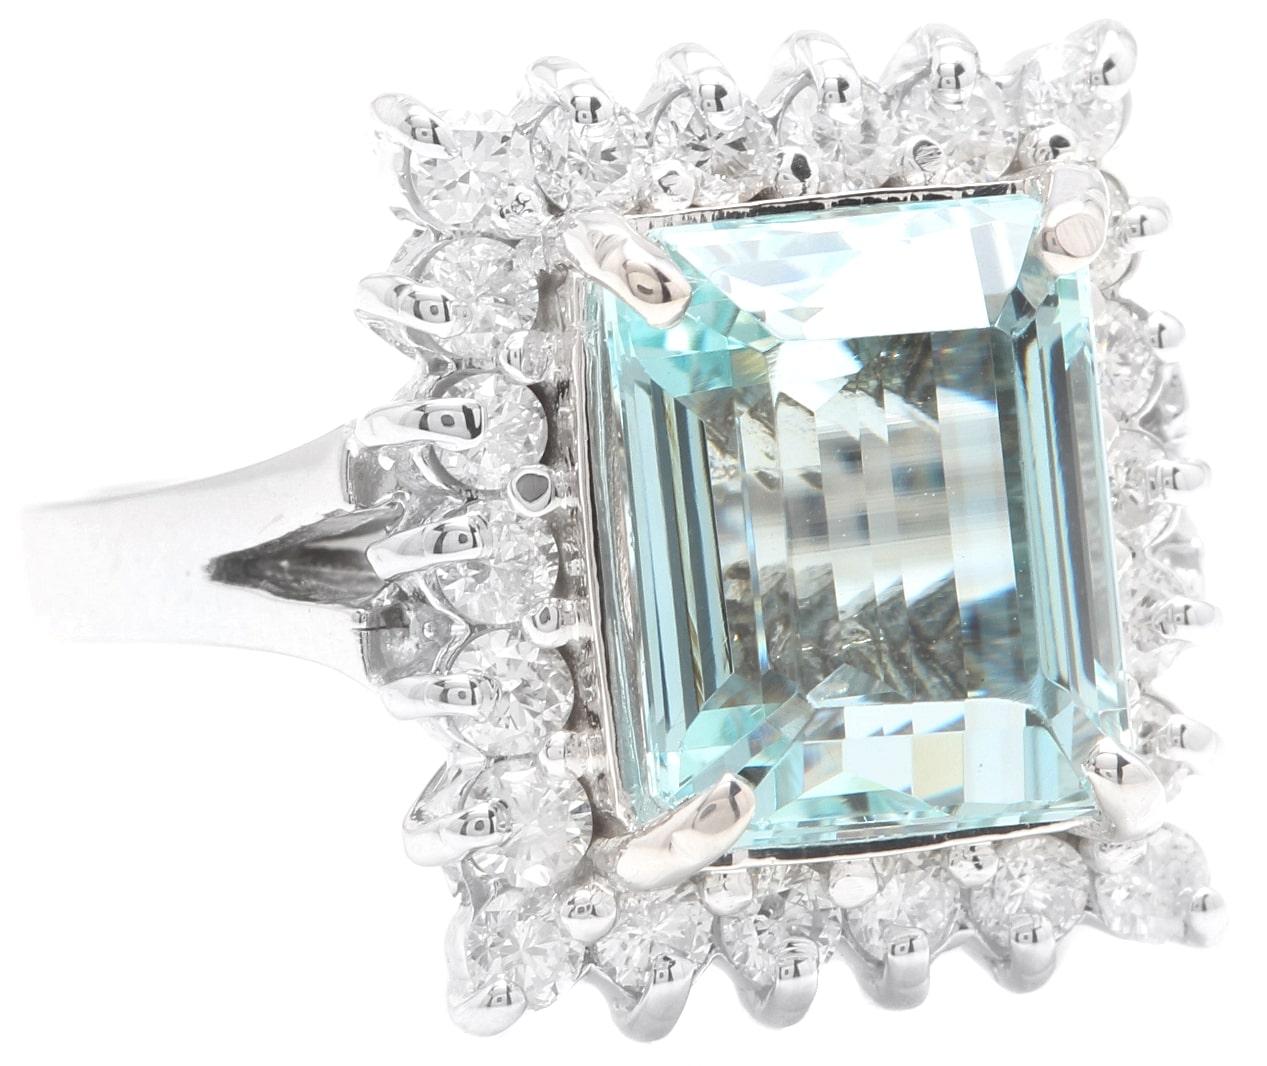 5.30 Carats Natural Aquamarine and Diamond 14K Solid White Gold Ring

Suggested Replacement Value: Approx. $5,500.00

Total Natural Emerald Cut Aquamarine Weights: Approx. 4.50 Carats 

Aquamarine Measures: Approx. 11 x 10mm

Aquamarine Treatment: